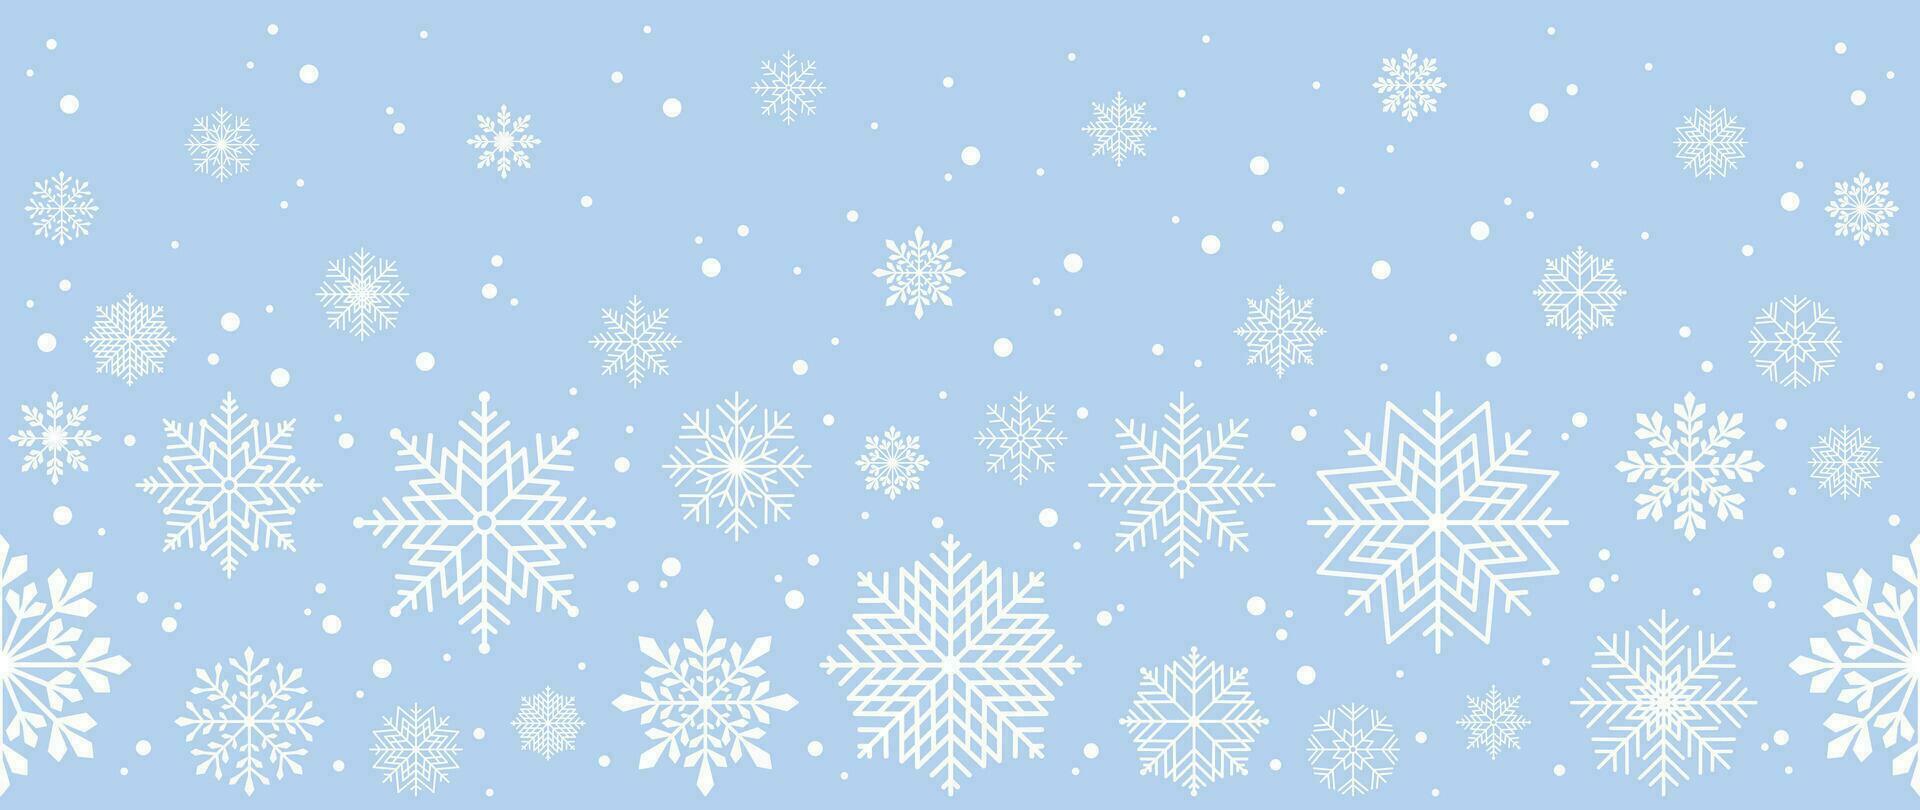 Winter background with snowflakes and snow. Seamless pattern. Vector illustration for cover, banner, poster, web, textiles and packaging.